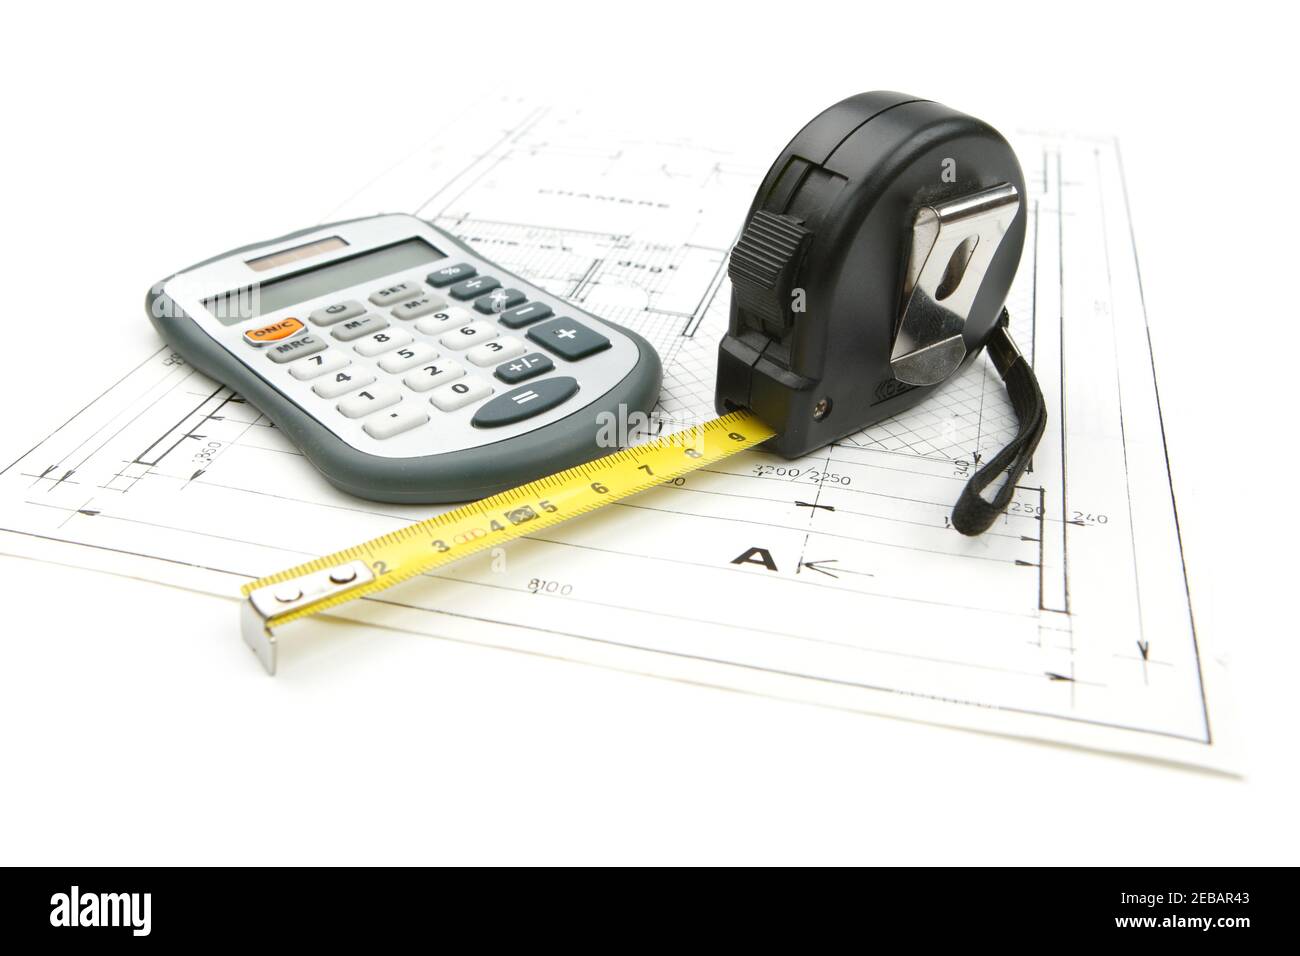 Tape measure with a calculator on the drawing plan of architectural  and construction project, isolated on white background Stock Photo